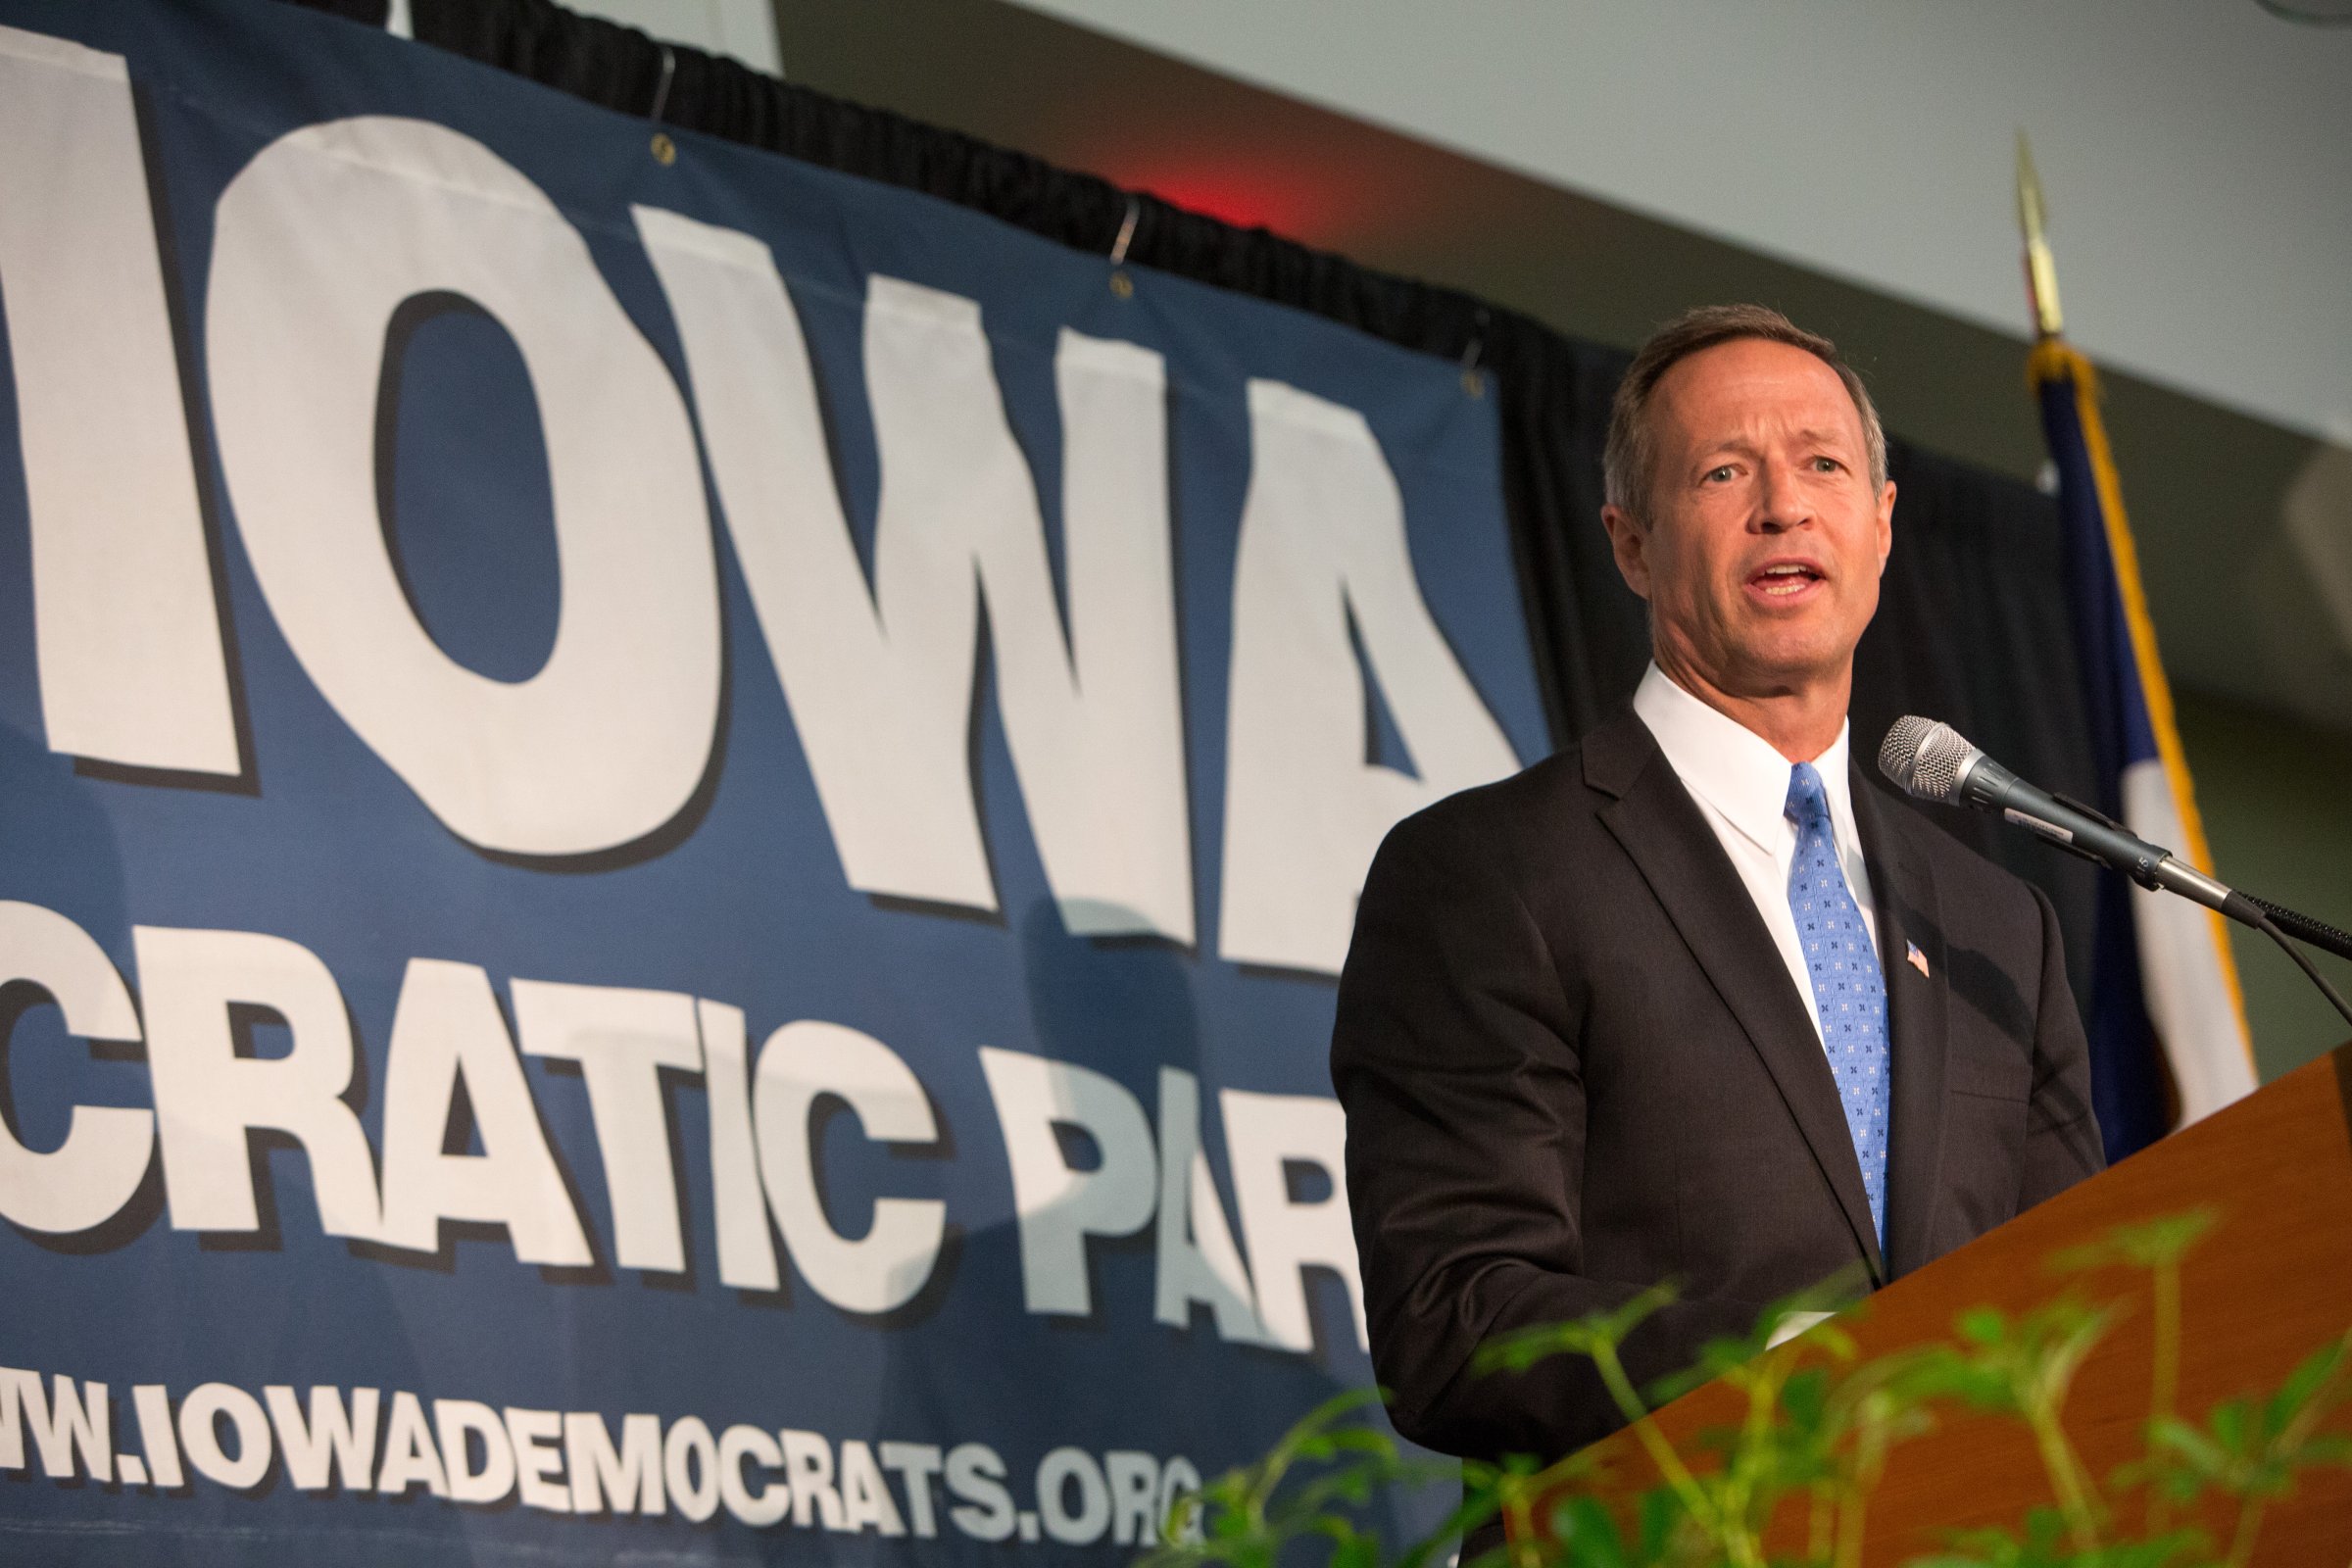 Maryland Gov. Martin O'Malley speaks on June 21, 2014, during the Iowa state Democratic Convention at the Iowa Events Center in Des Moines.